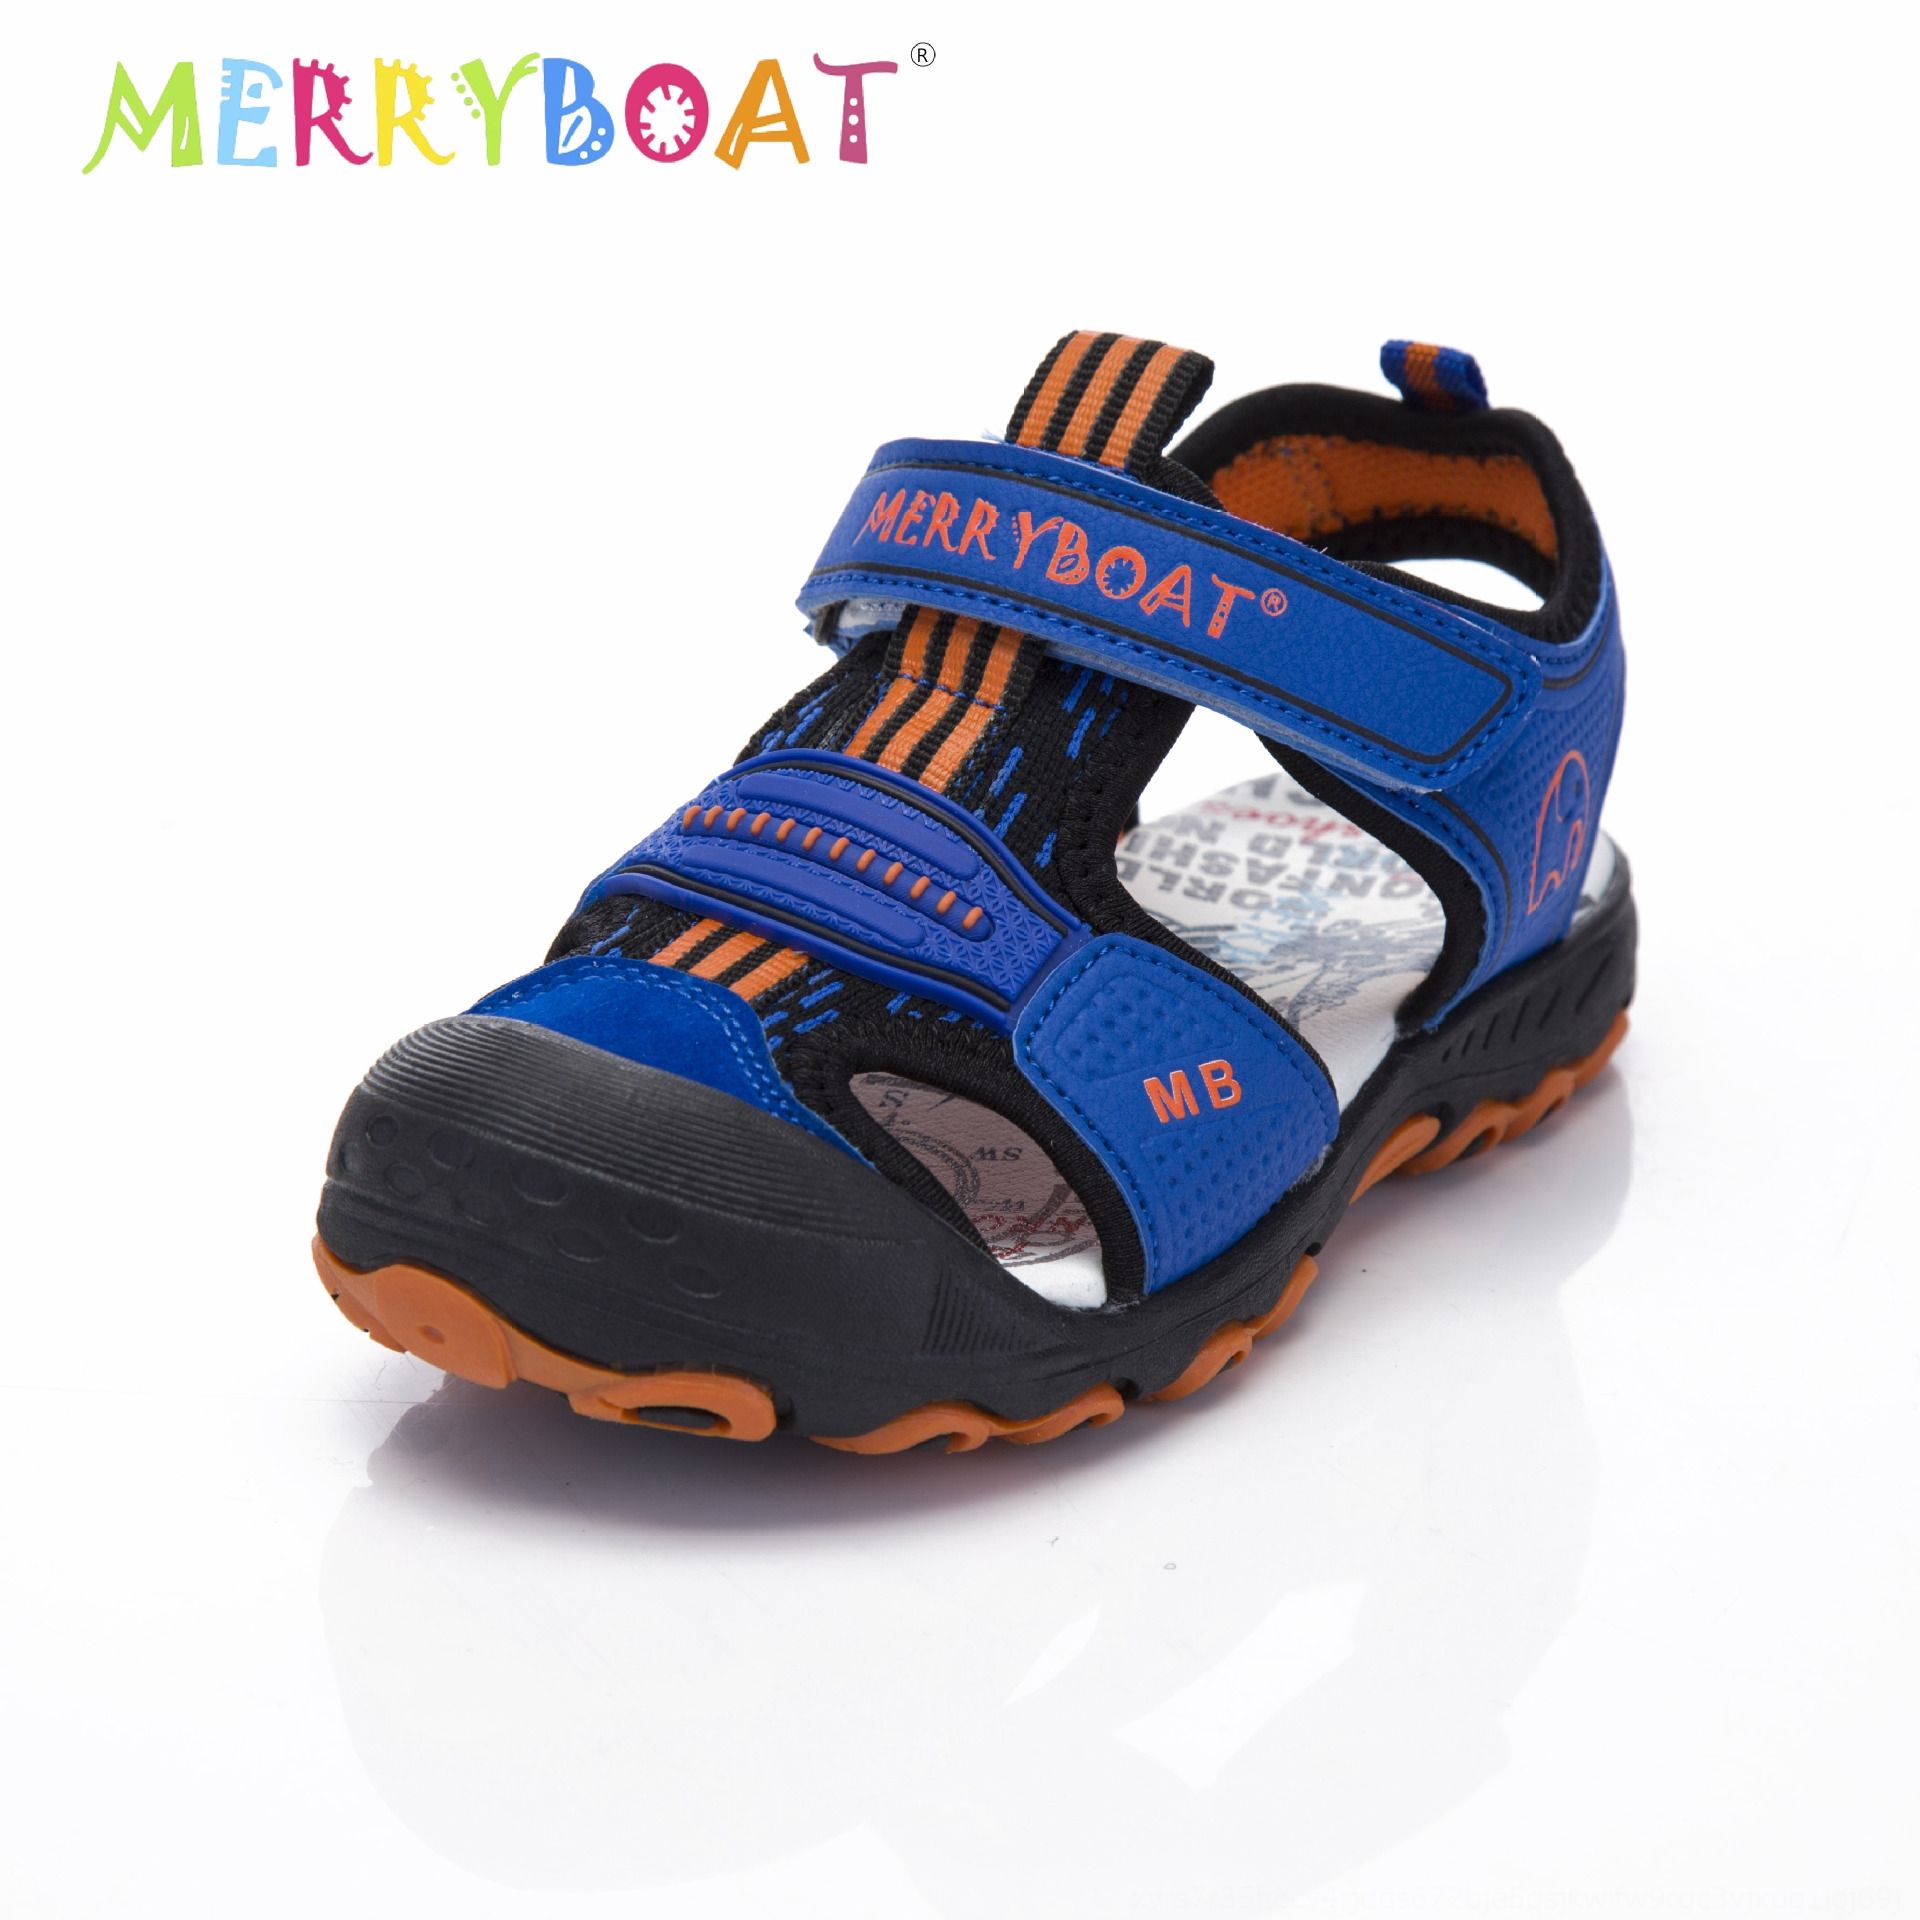 m and s childrens shoes